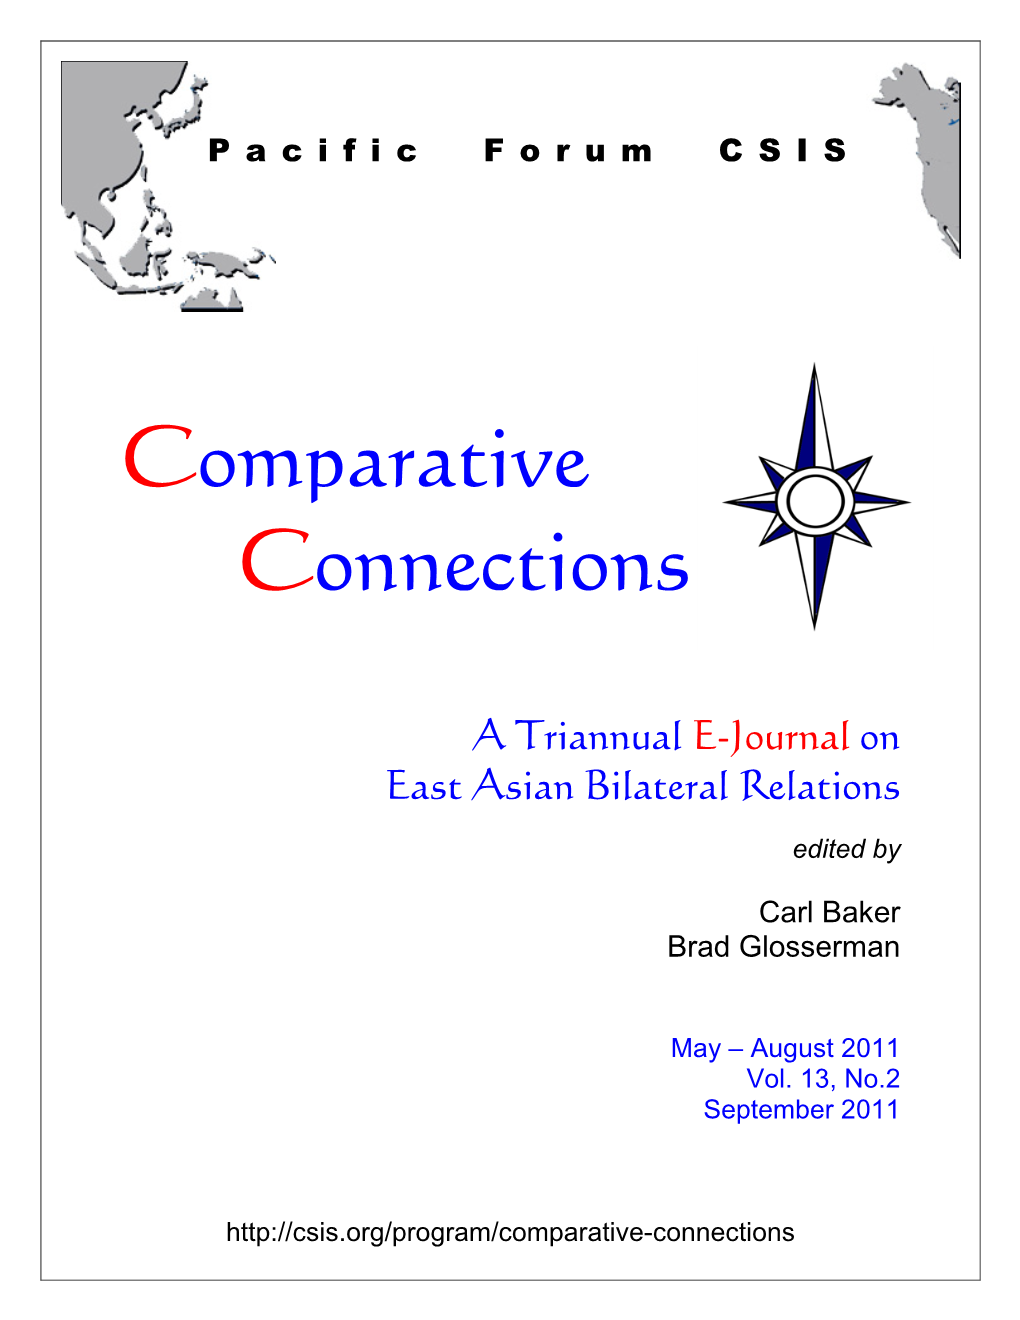 Comparative Connections, Volume 13, Number 2